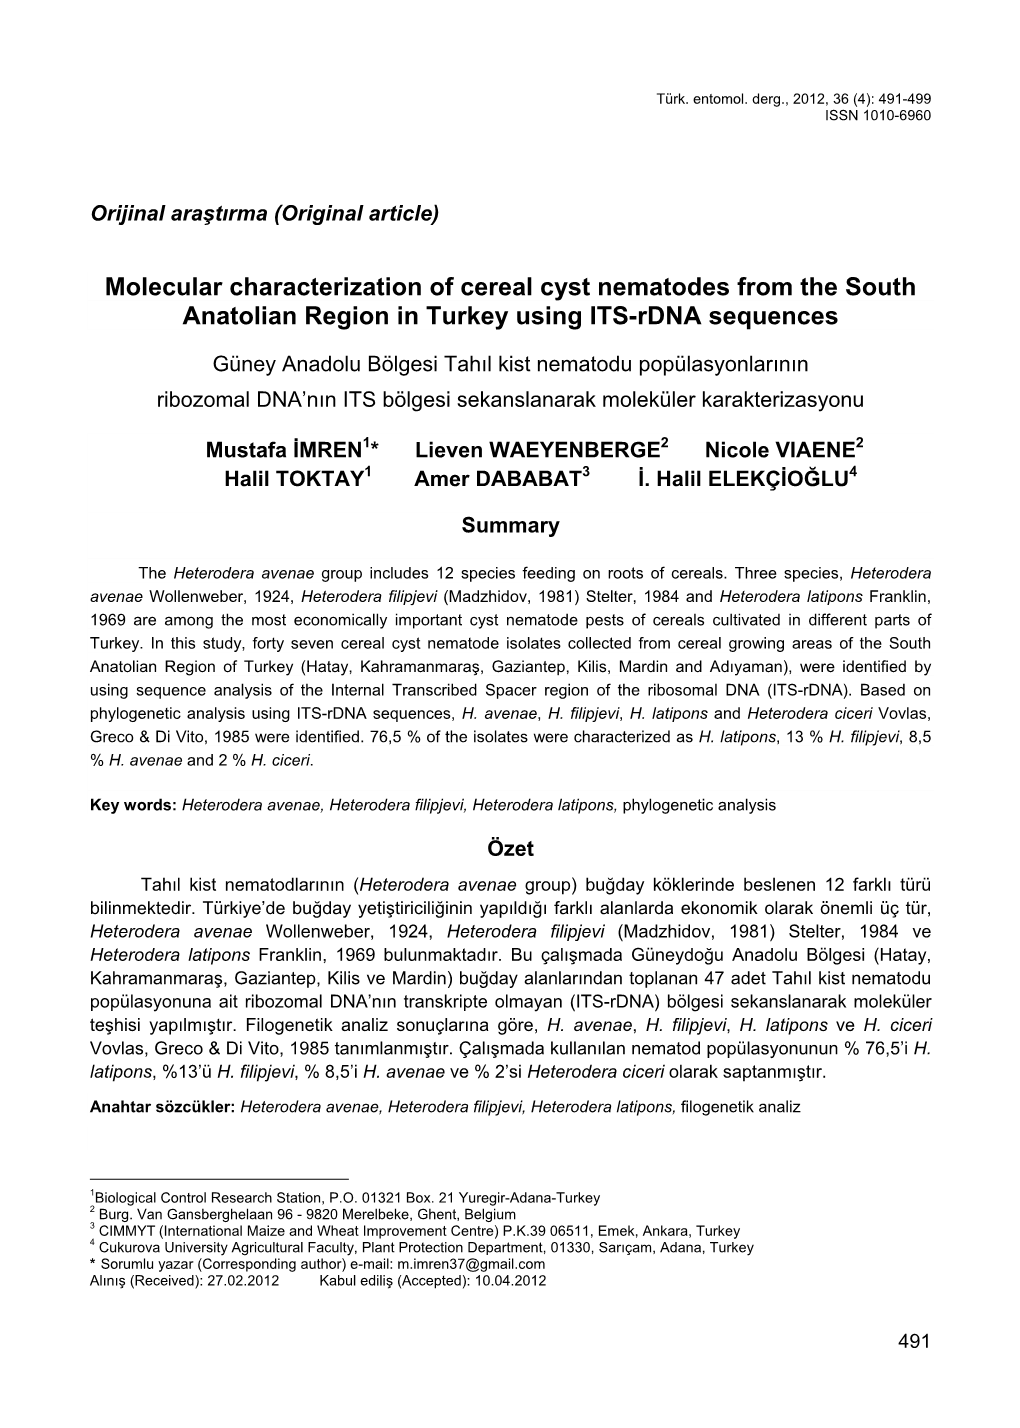 Molecular Characterization of Cereal Cyst Nematodes from the South Anatolian Region in Turkey Using ITS-Rdna Sequences